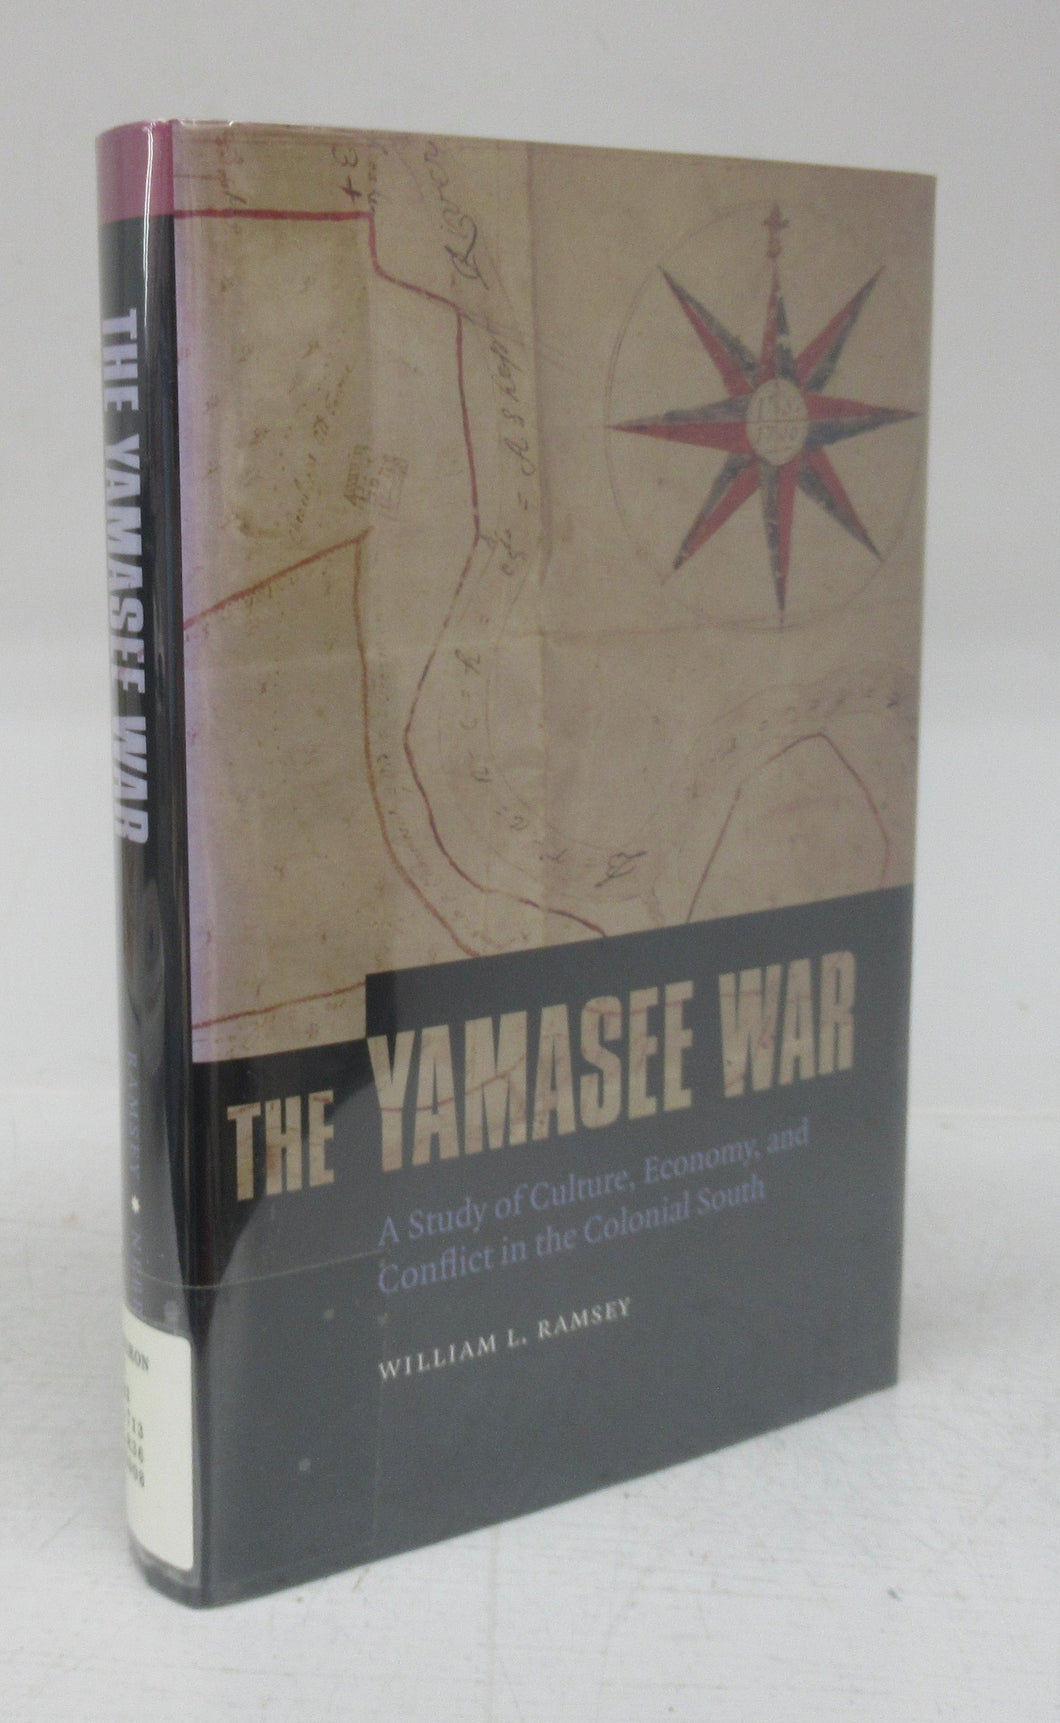 The Yamasee War: A Study of Culture, Economy, and Conflict in the Colonial South